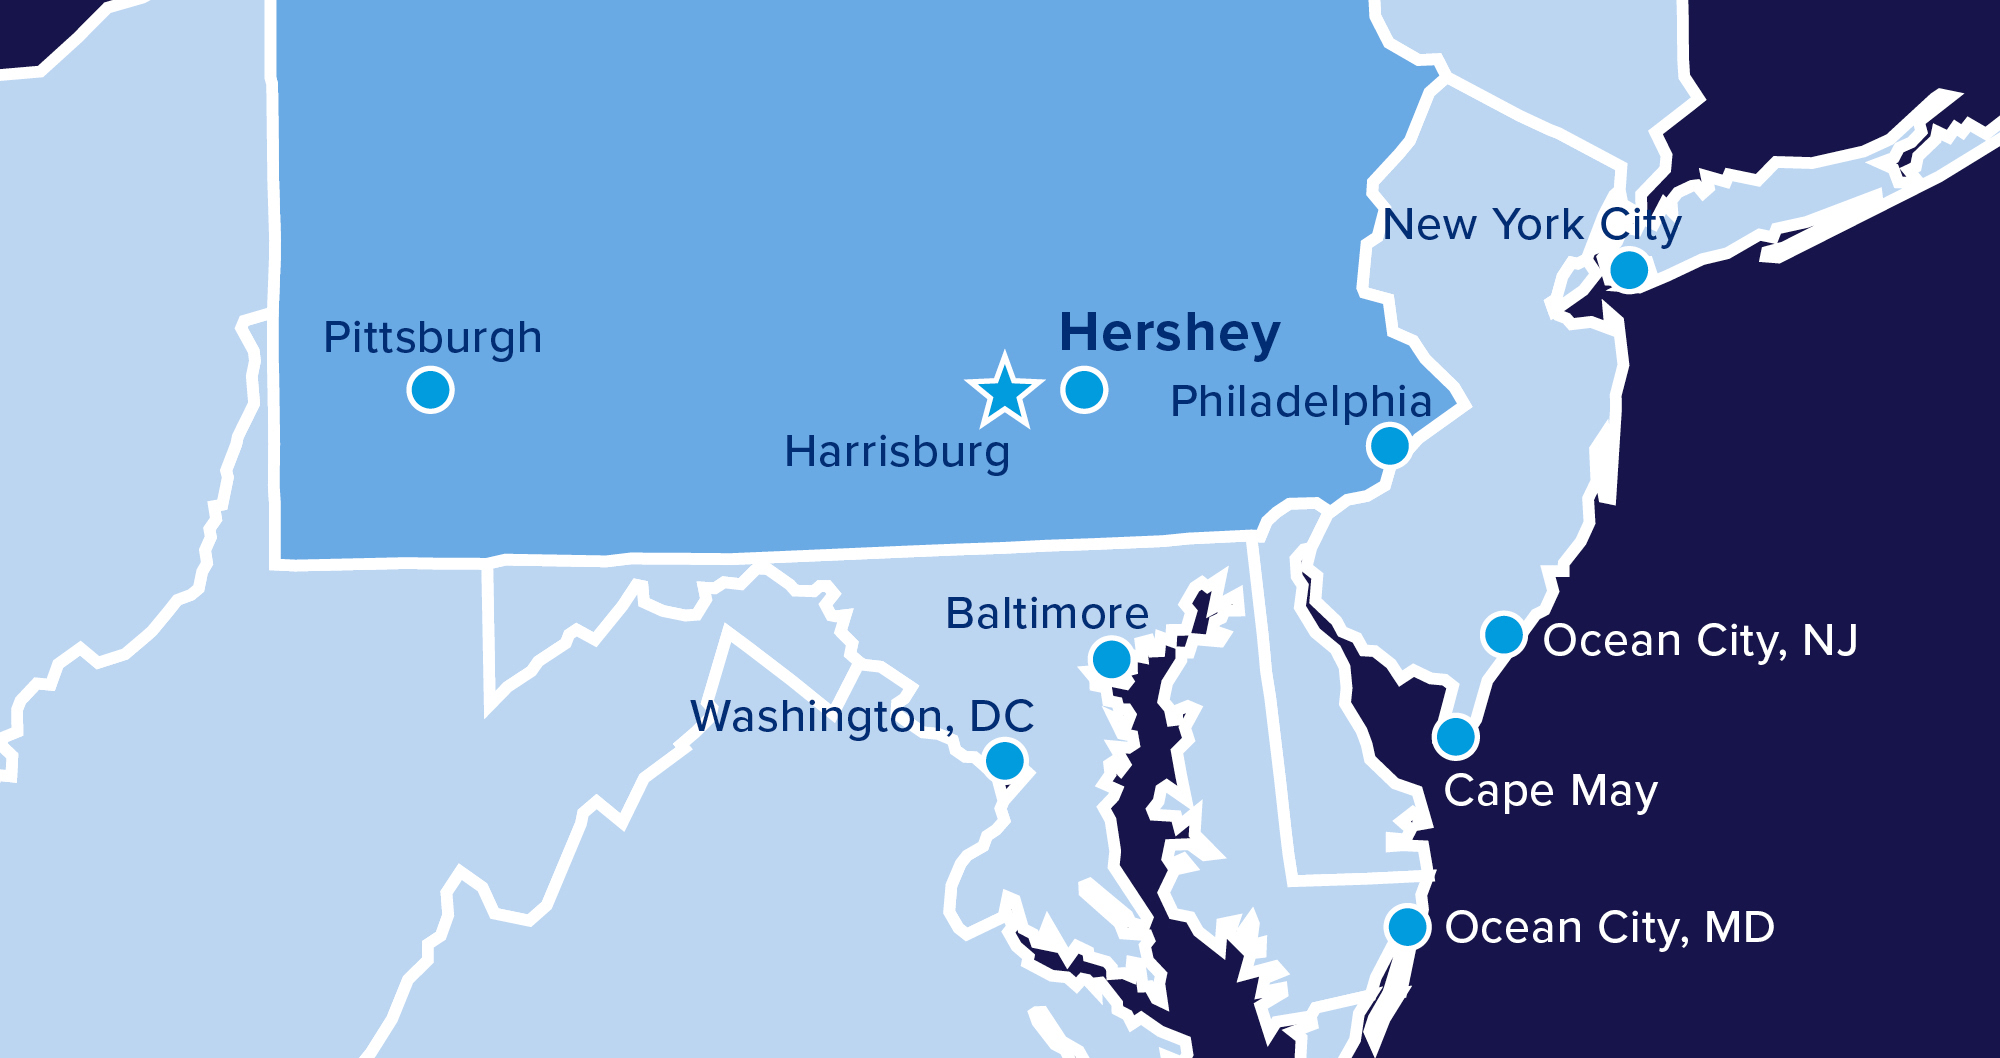 A stylized map of the area around Pennsylvania, featuring Hershey prominently and showing the larger cities (Harrisburg, Philadelphia, etc.) nearby